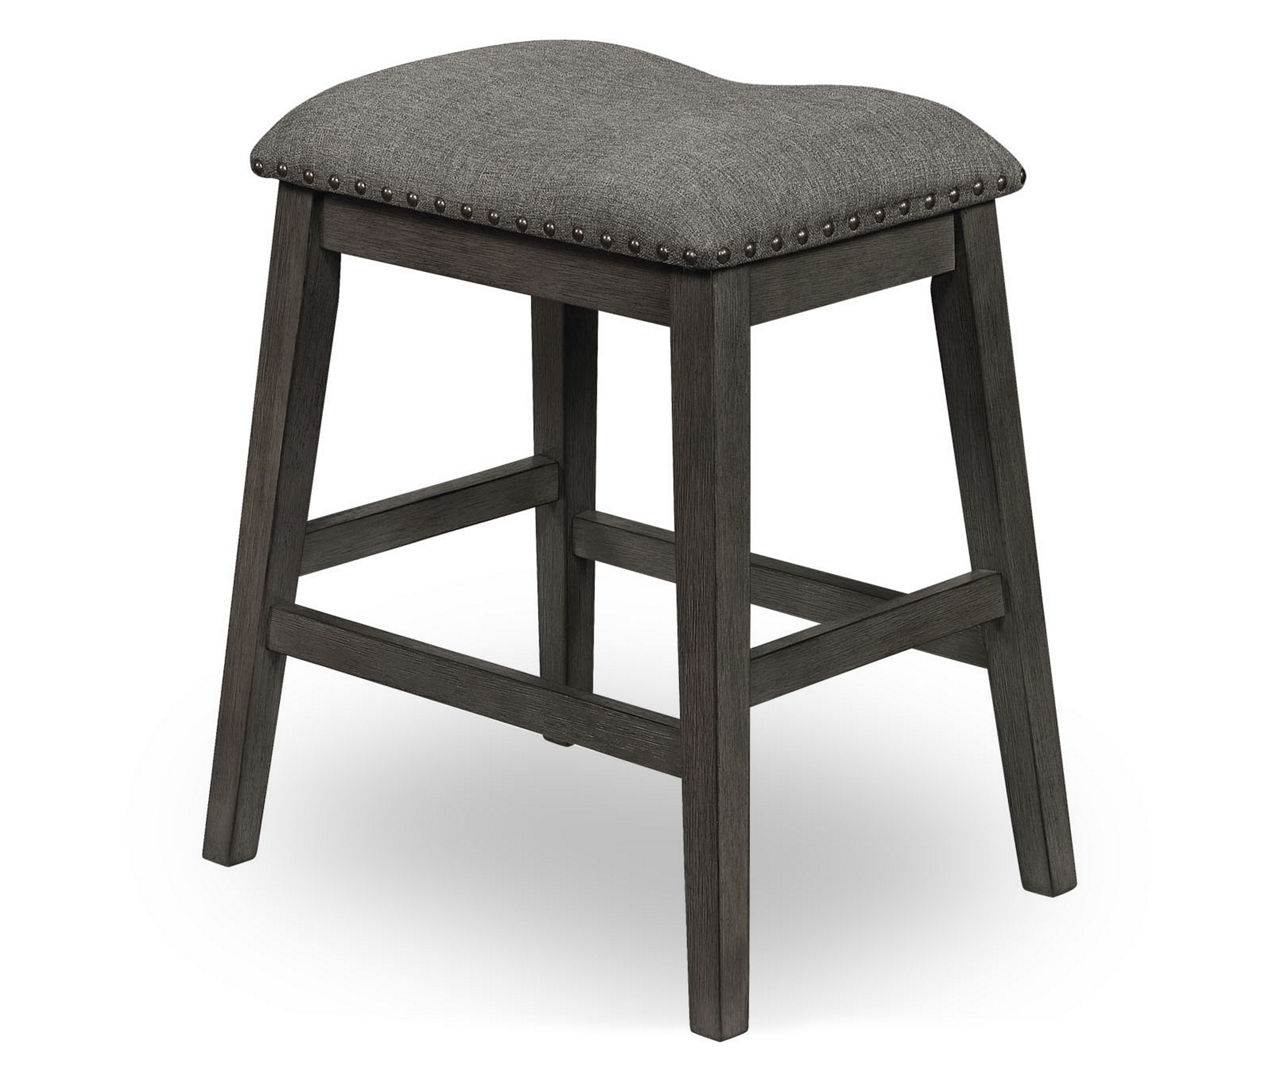 Real Living Raleigh Gray Backless Upholstered Pub Stools, 2-Pack